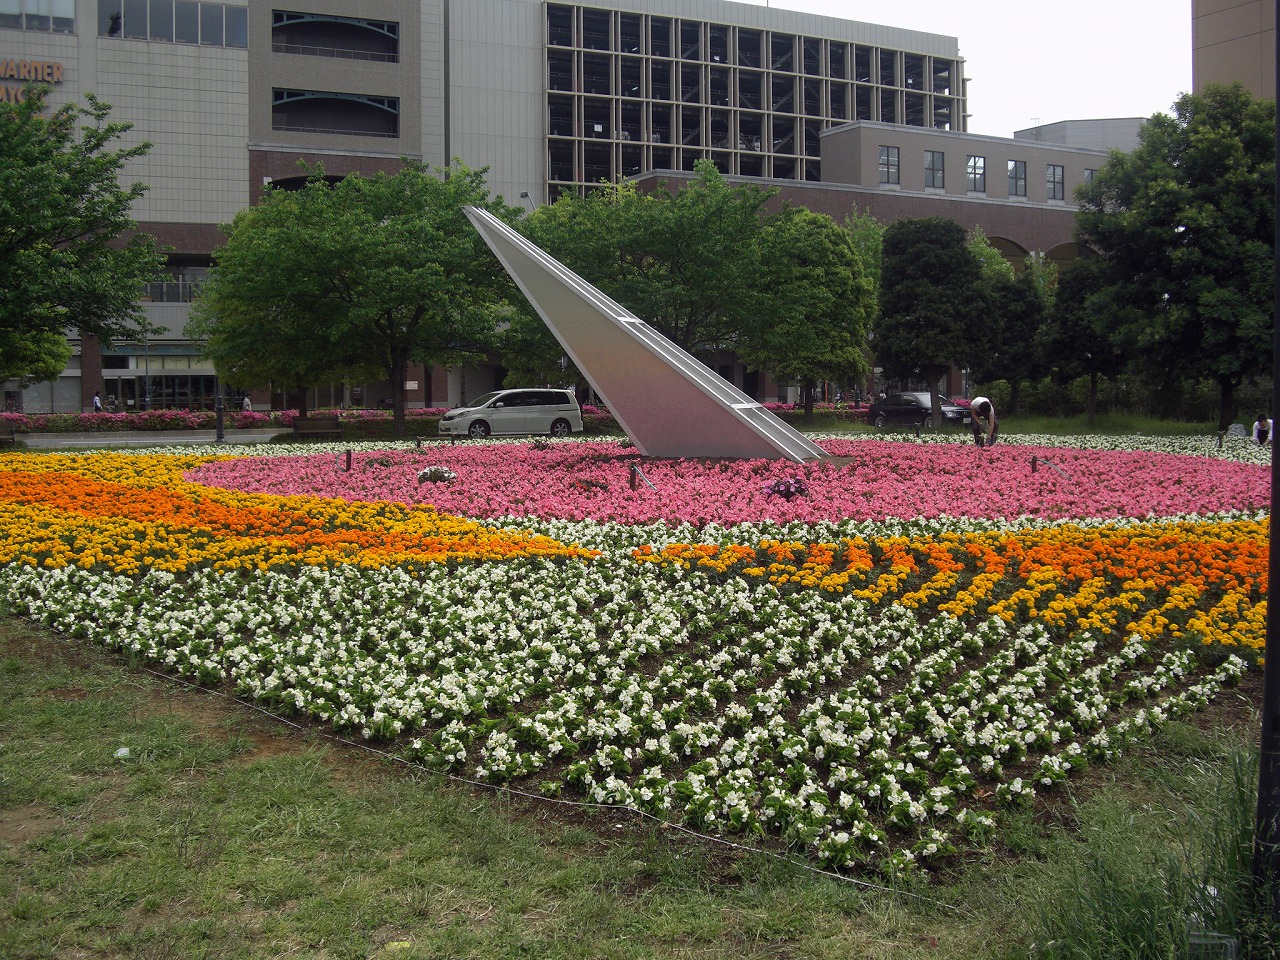 Unga park and Flower